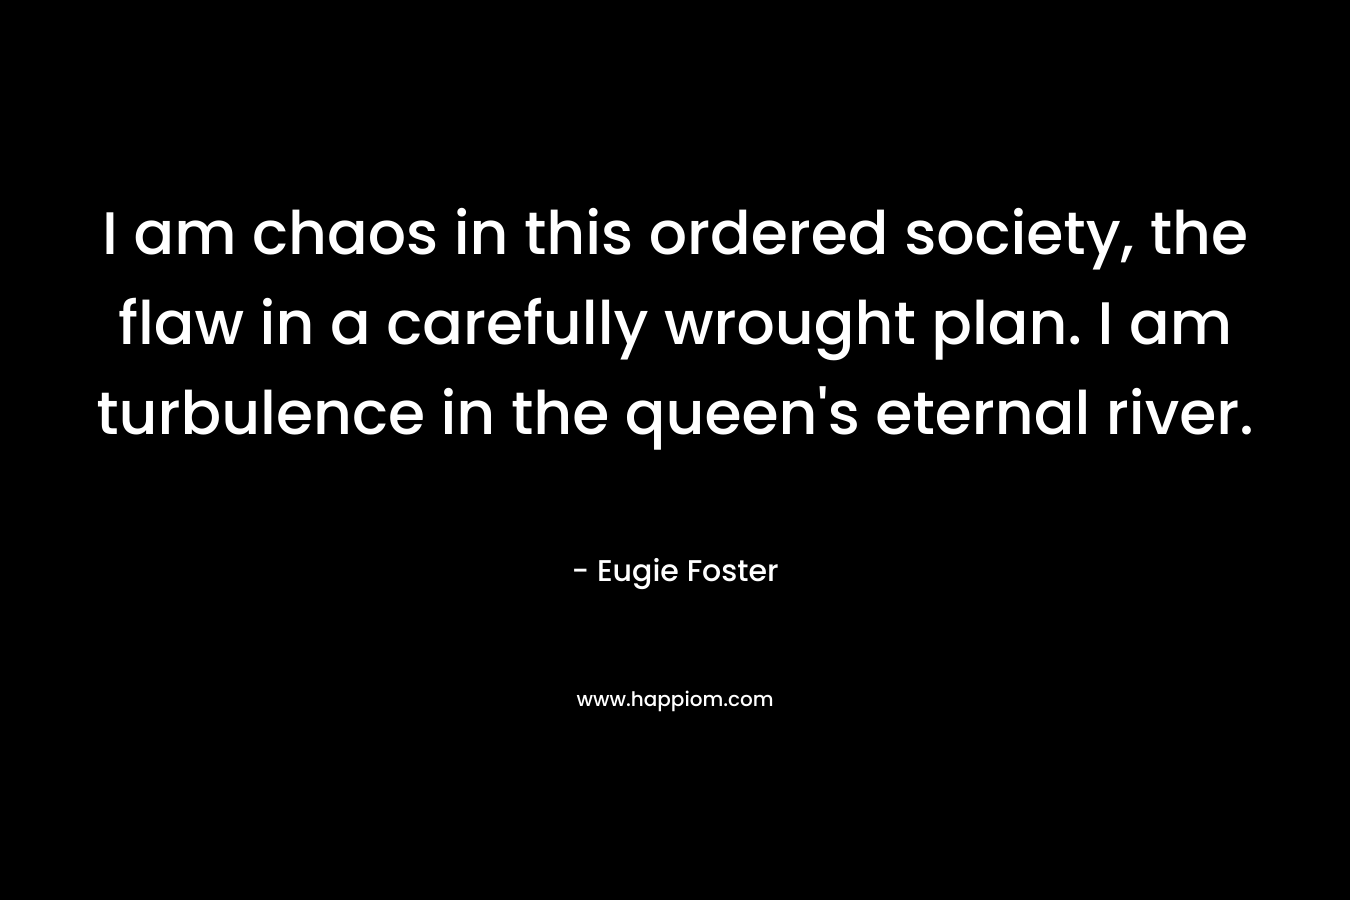 I am chaos in this ordered society, the flaw in a carefully wrought plan. I am turbulence in the queen’s eternal river. – Eugie Foster